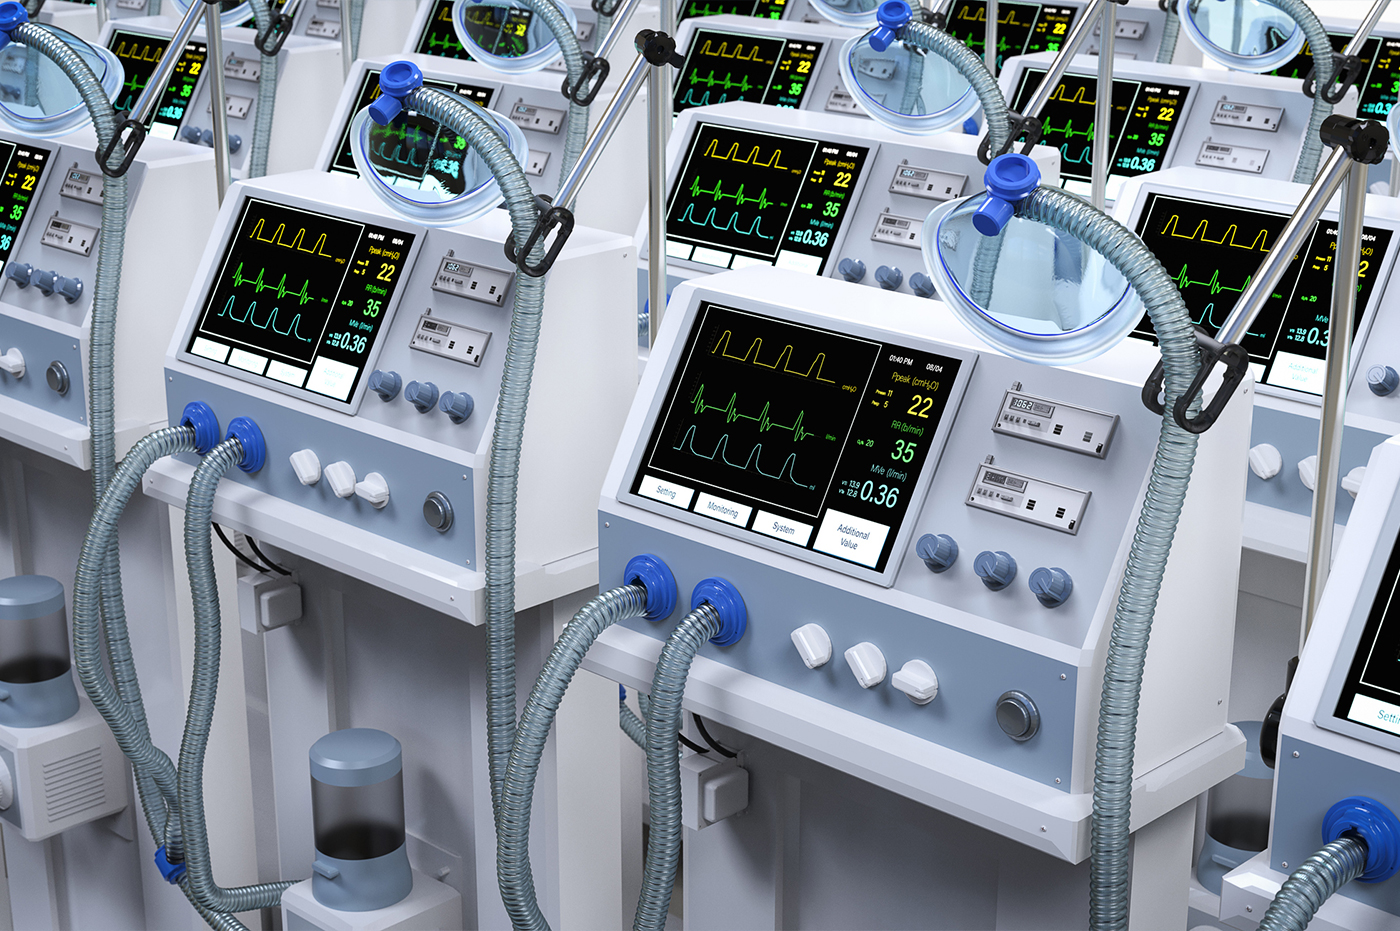 Rows of mobile medical devices monitoring vitals